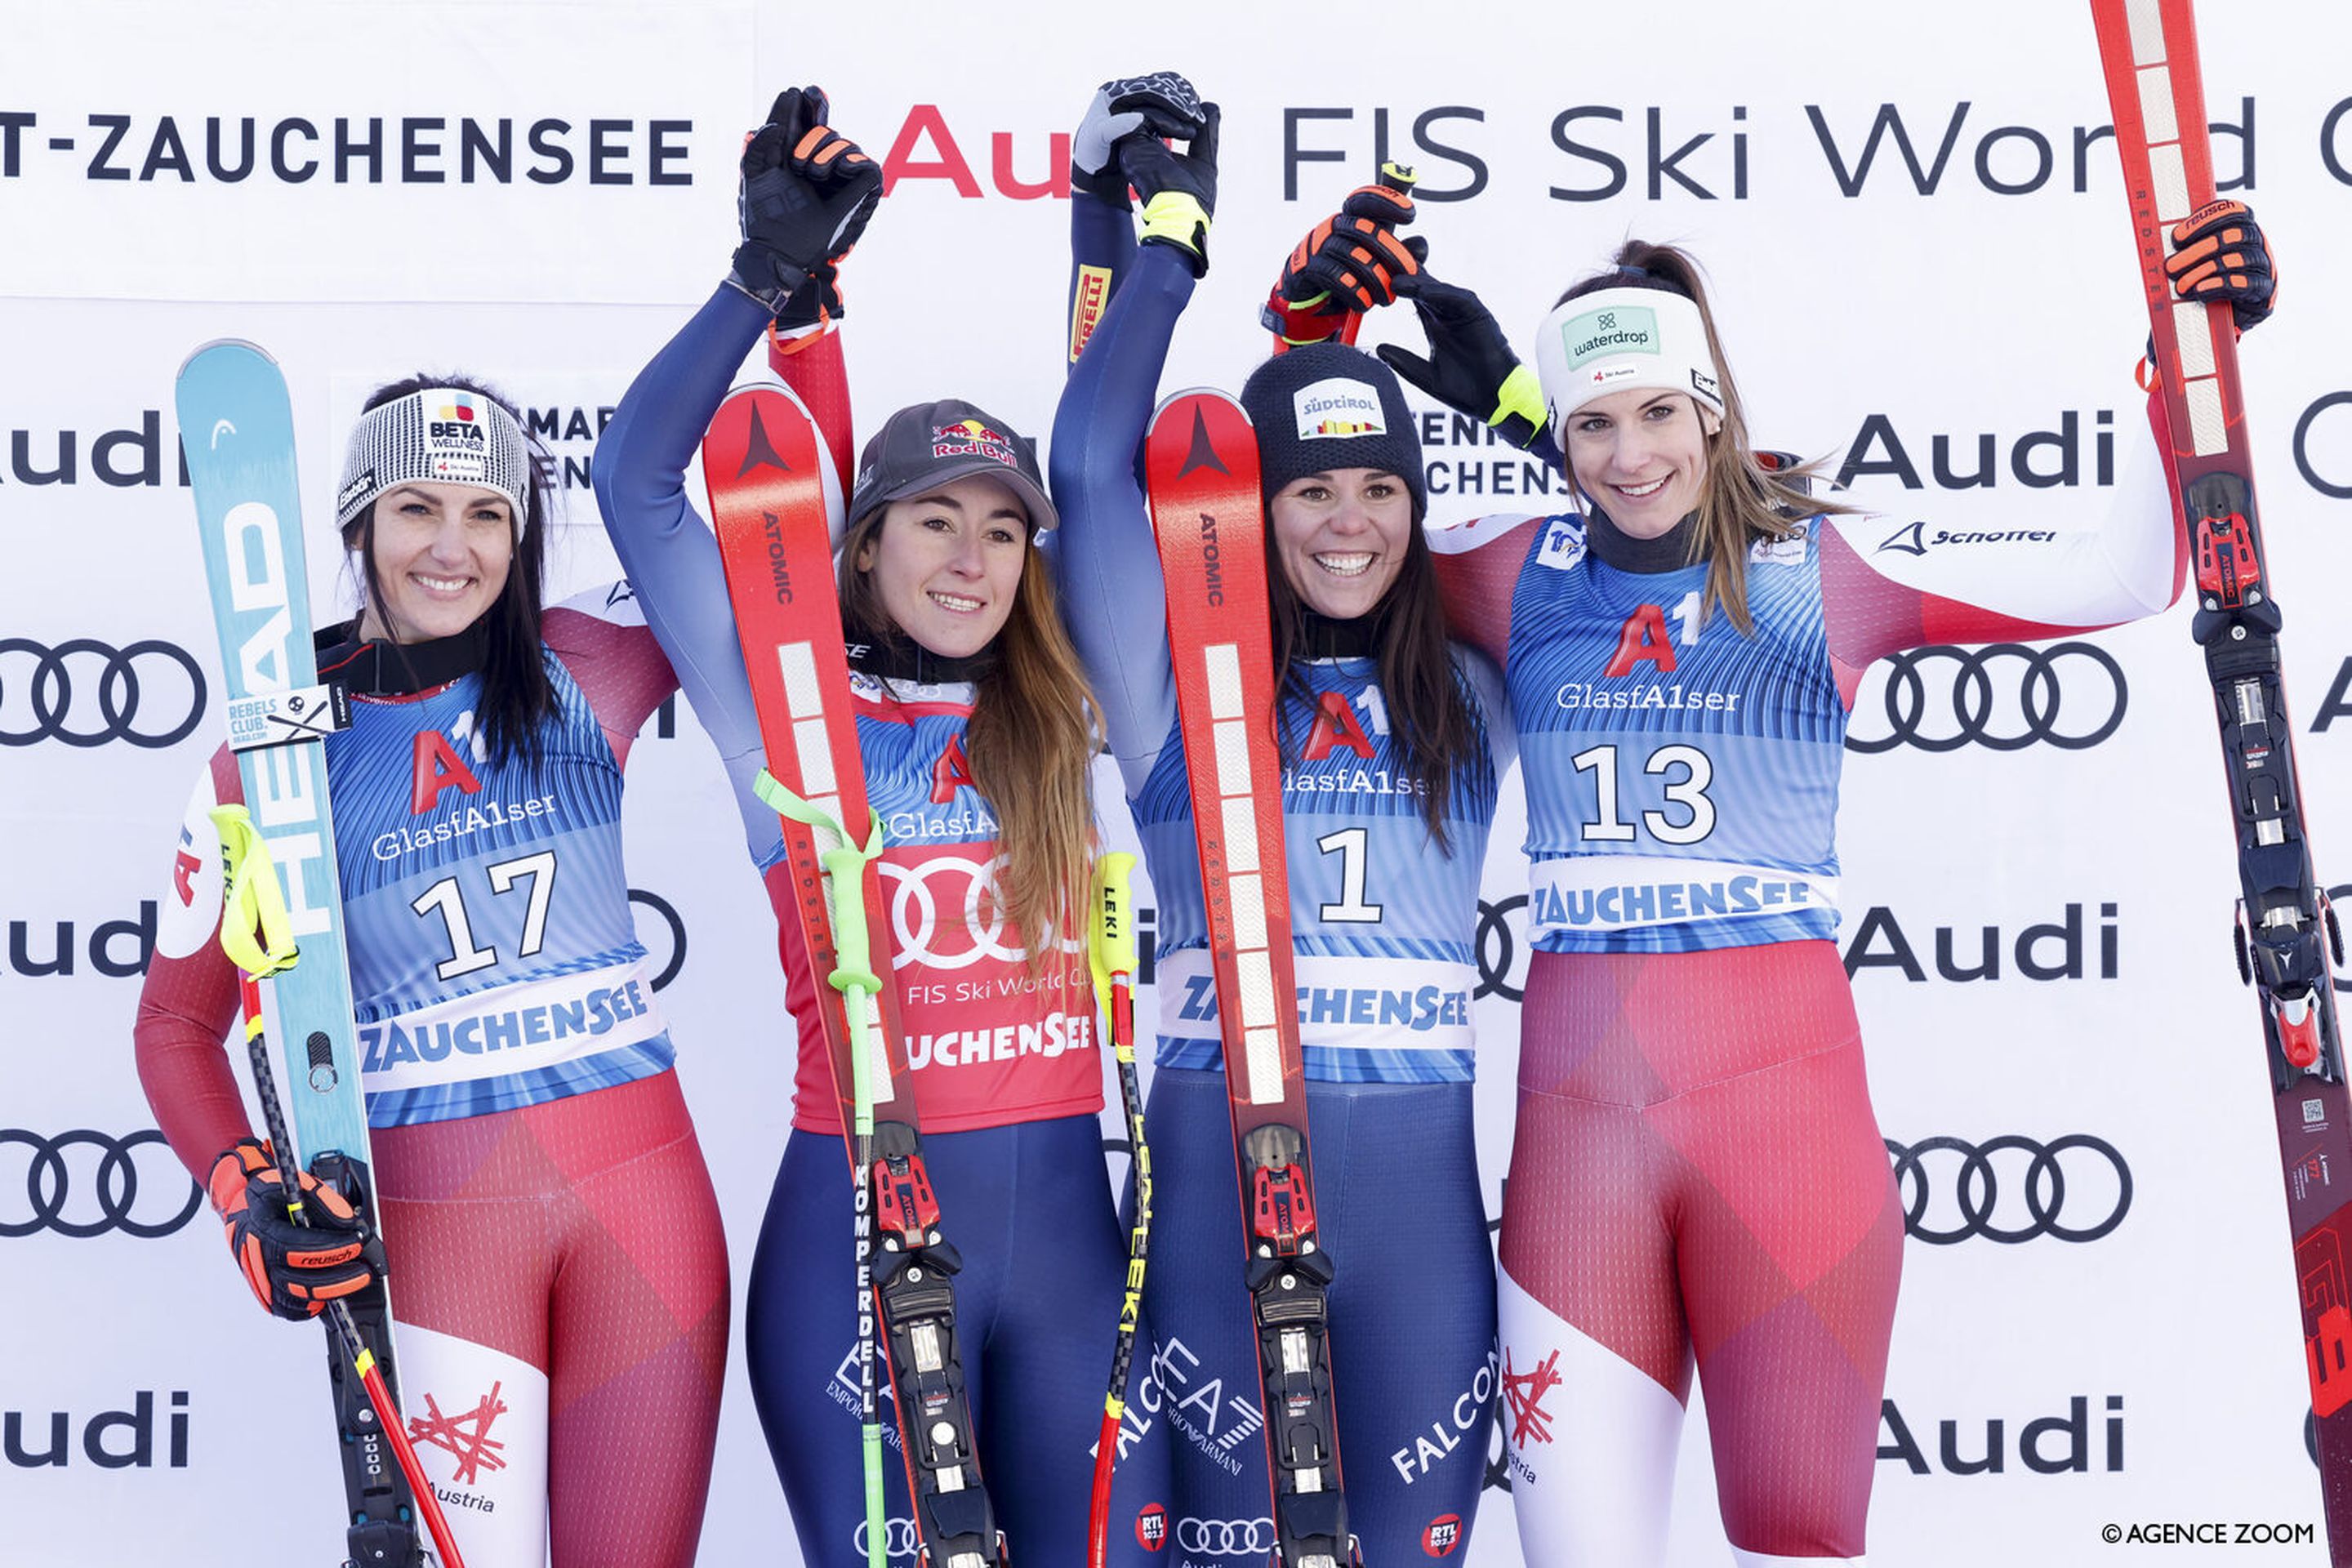 Saturday's four-skier podium included two Italians and two Austrians (Agence Zoom)